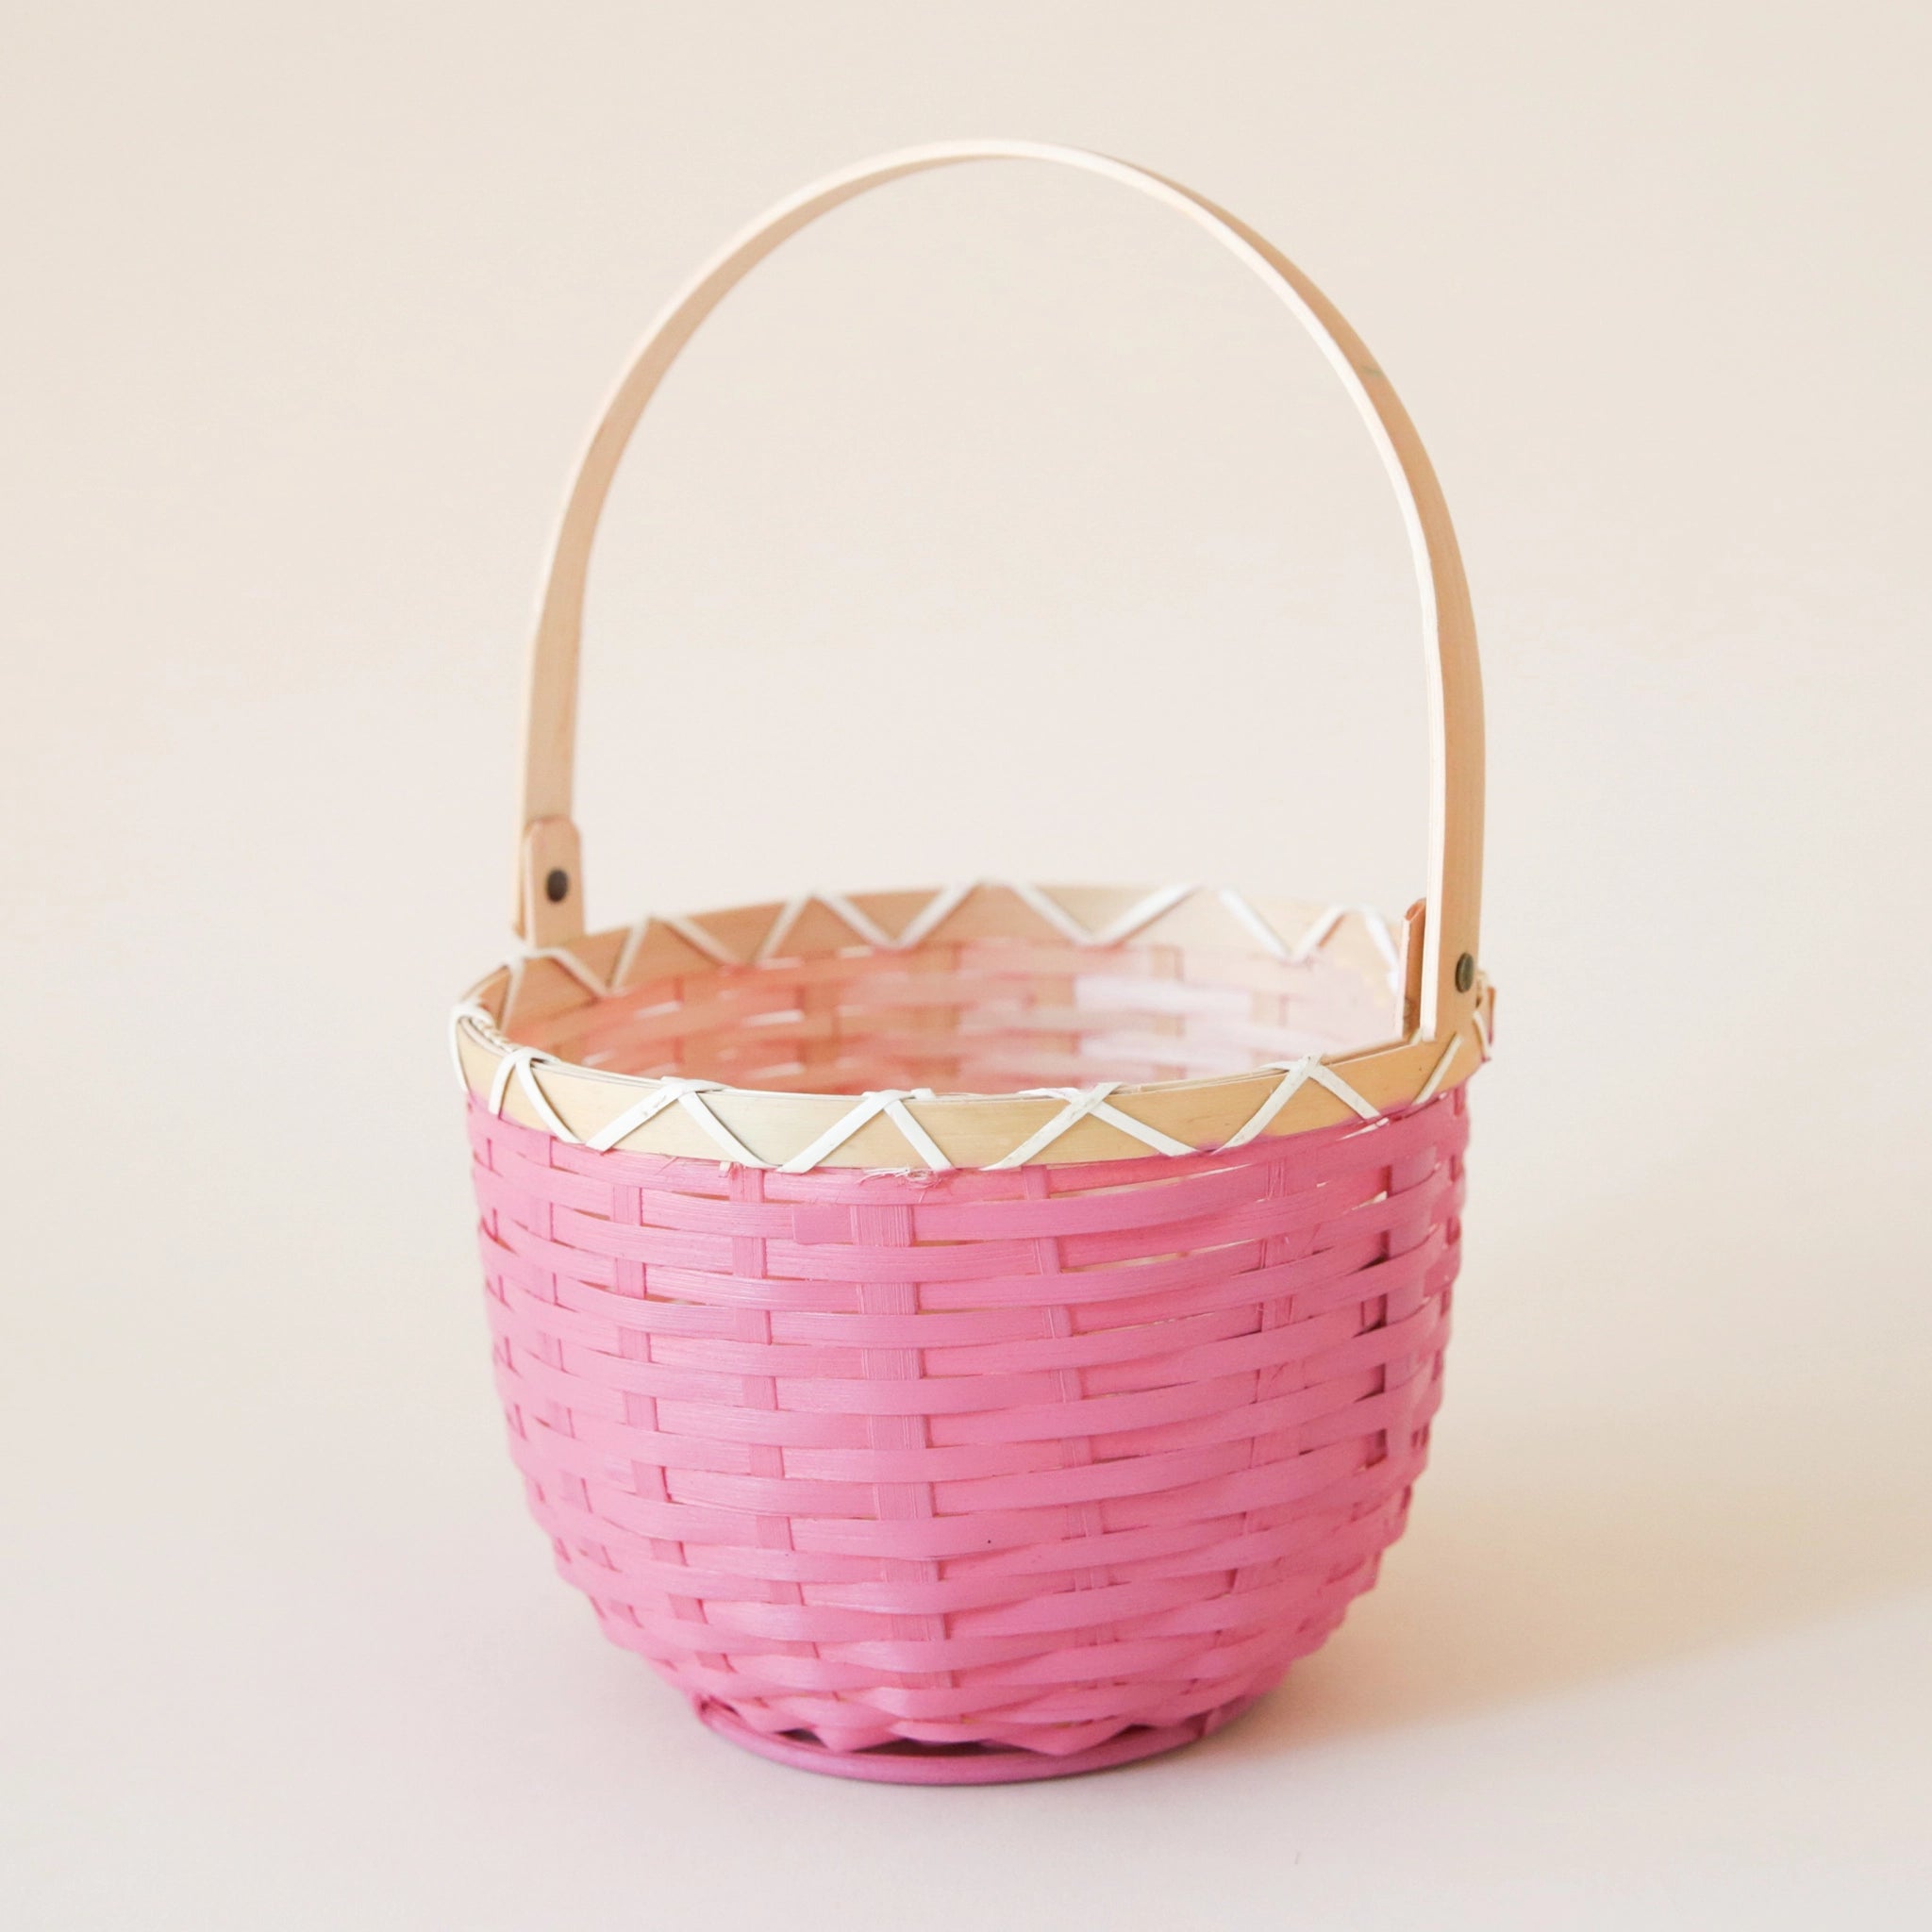 On a cream background is a bright pink and natural rattan woven spring basket. 